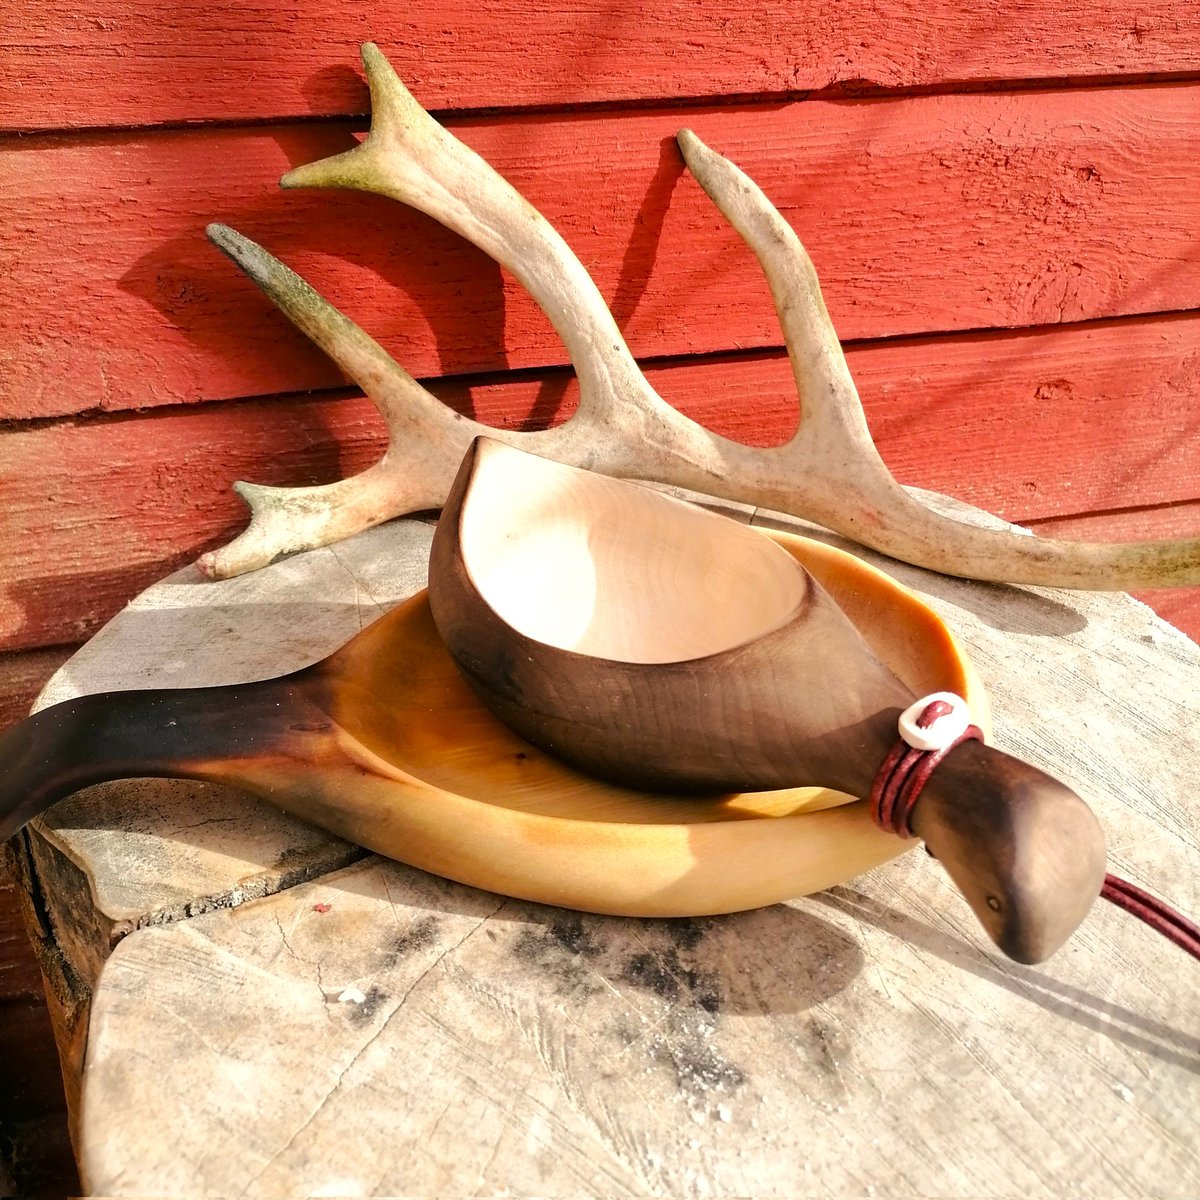 Kuksa in birch wood hand carved by Witaberget from Sweden
witaberget.etsy.com/listing/161325…
#kuksa #bushcraft #camping #coffeecup #mug #lapland